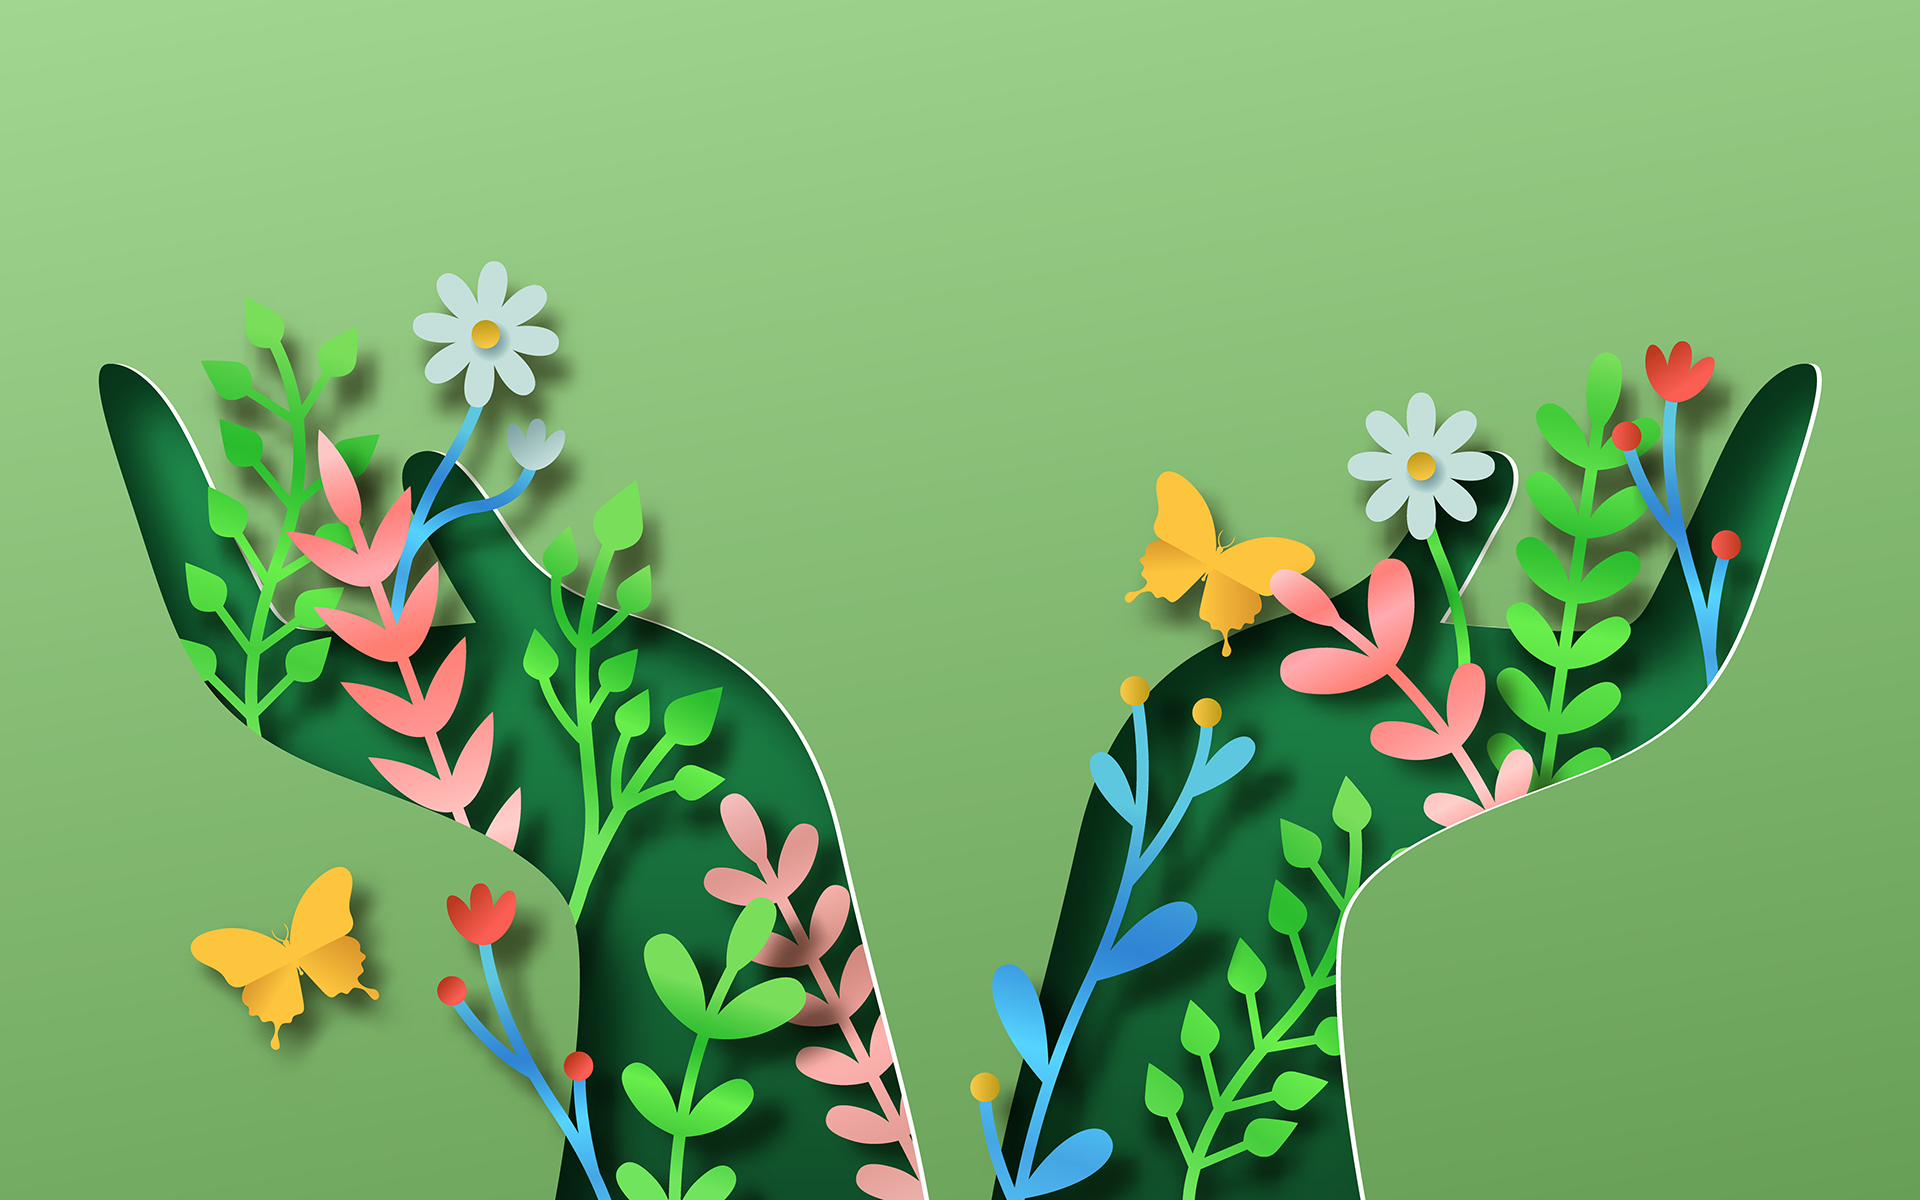 A 12-Minute Nature Meditation for Being in the Moment—Green paper cutout art of two hands with palms up to the sky with flowers, plants, and butterflies coming out of the hand cutouts and into the foreground.